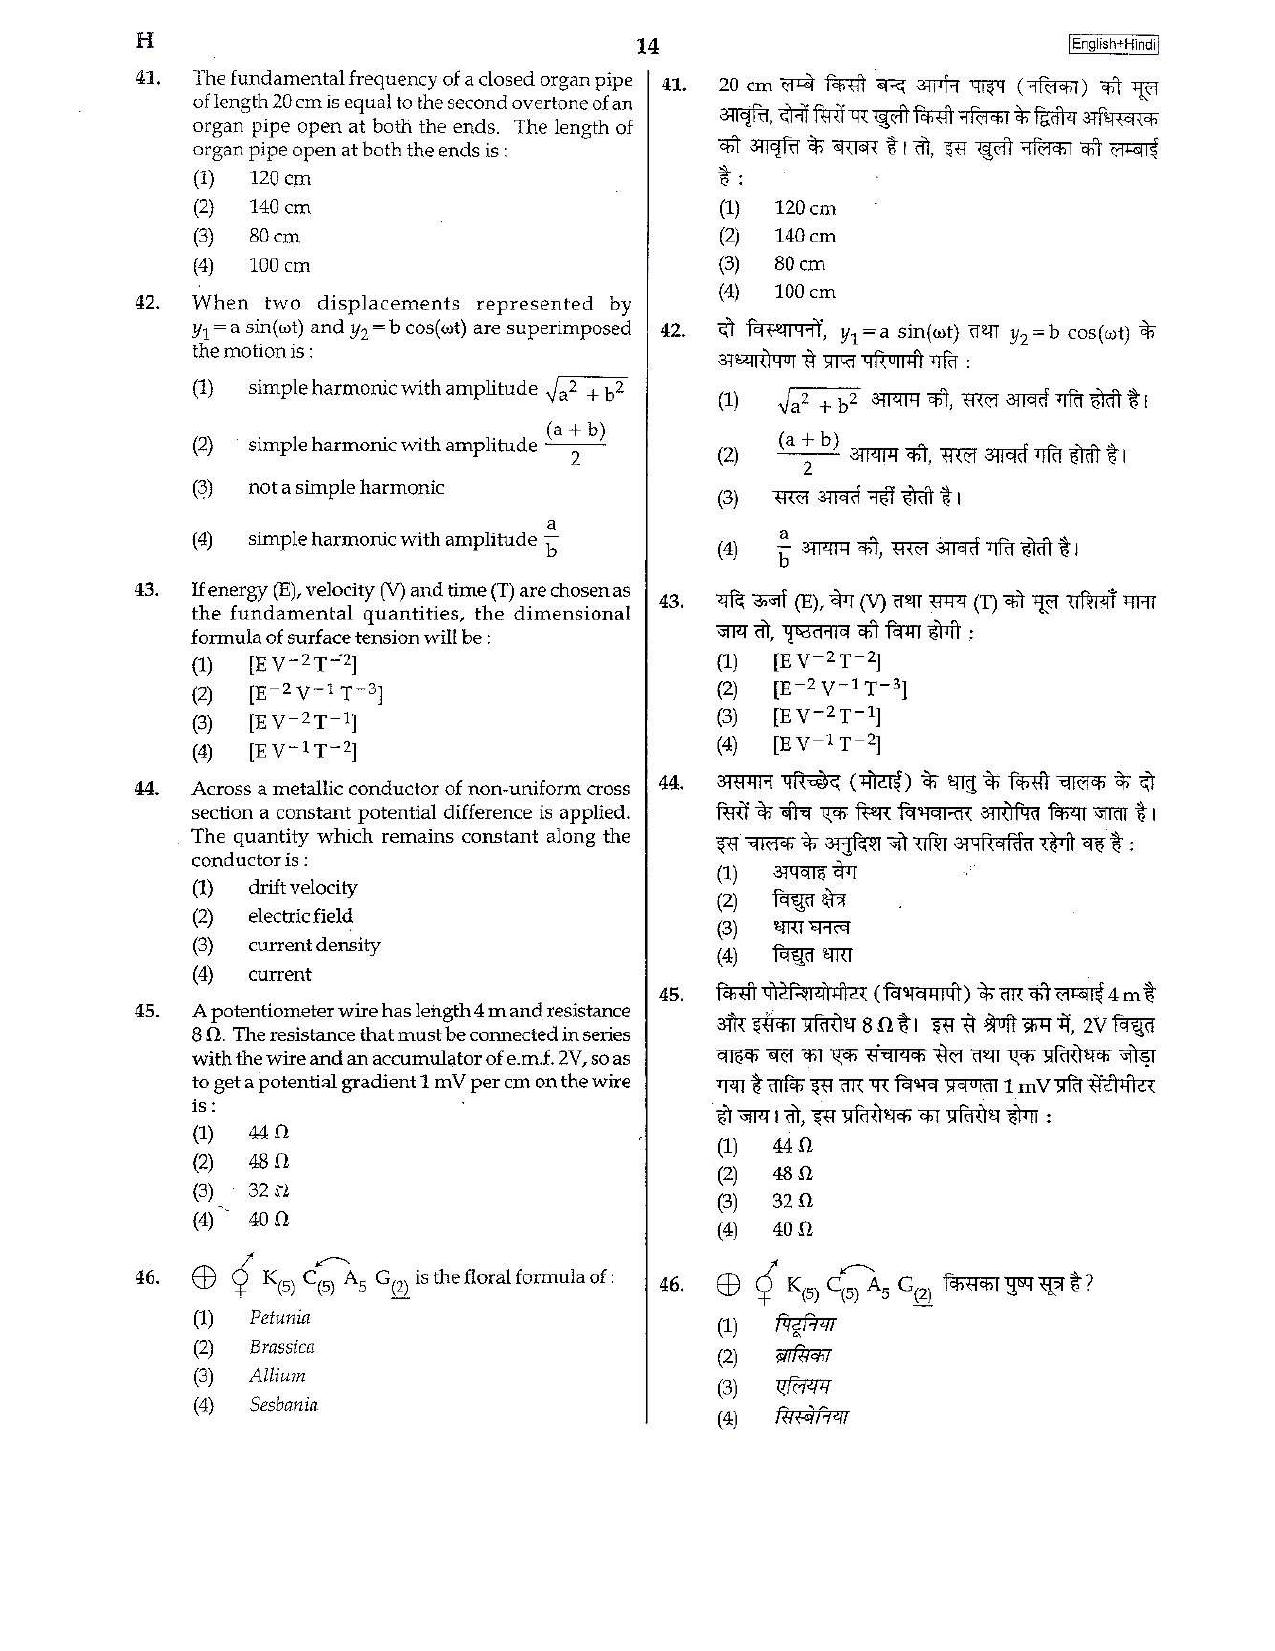 NEET Code H 2015 Question Paper - Page 14